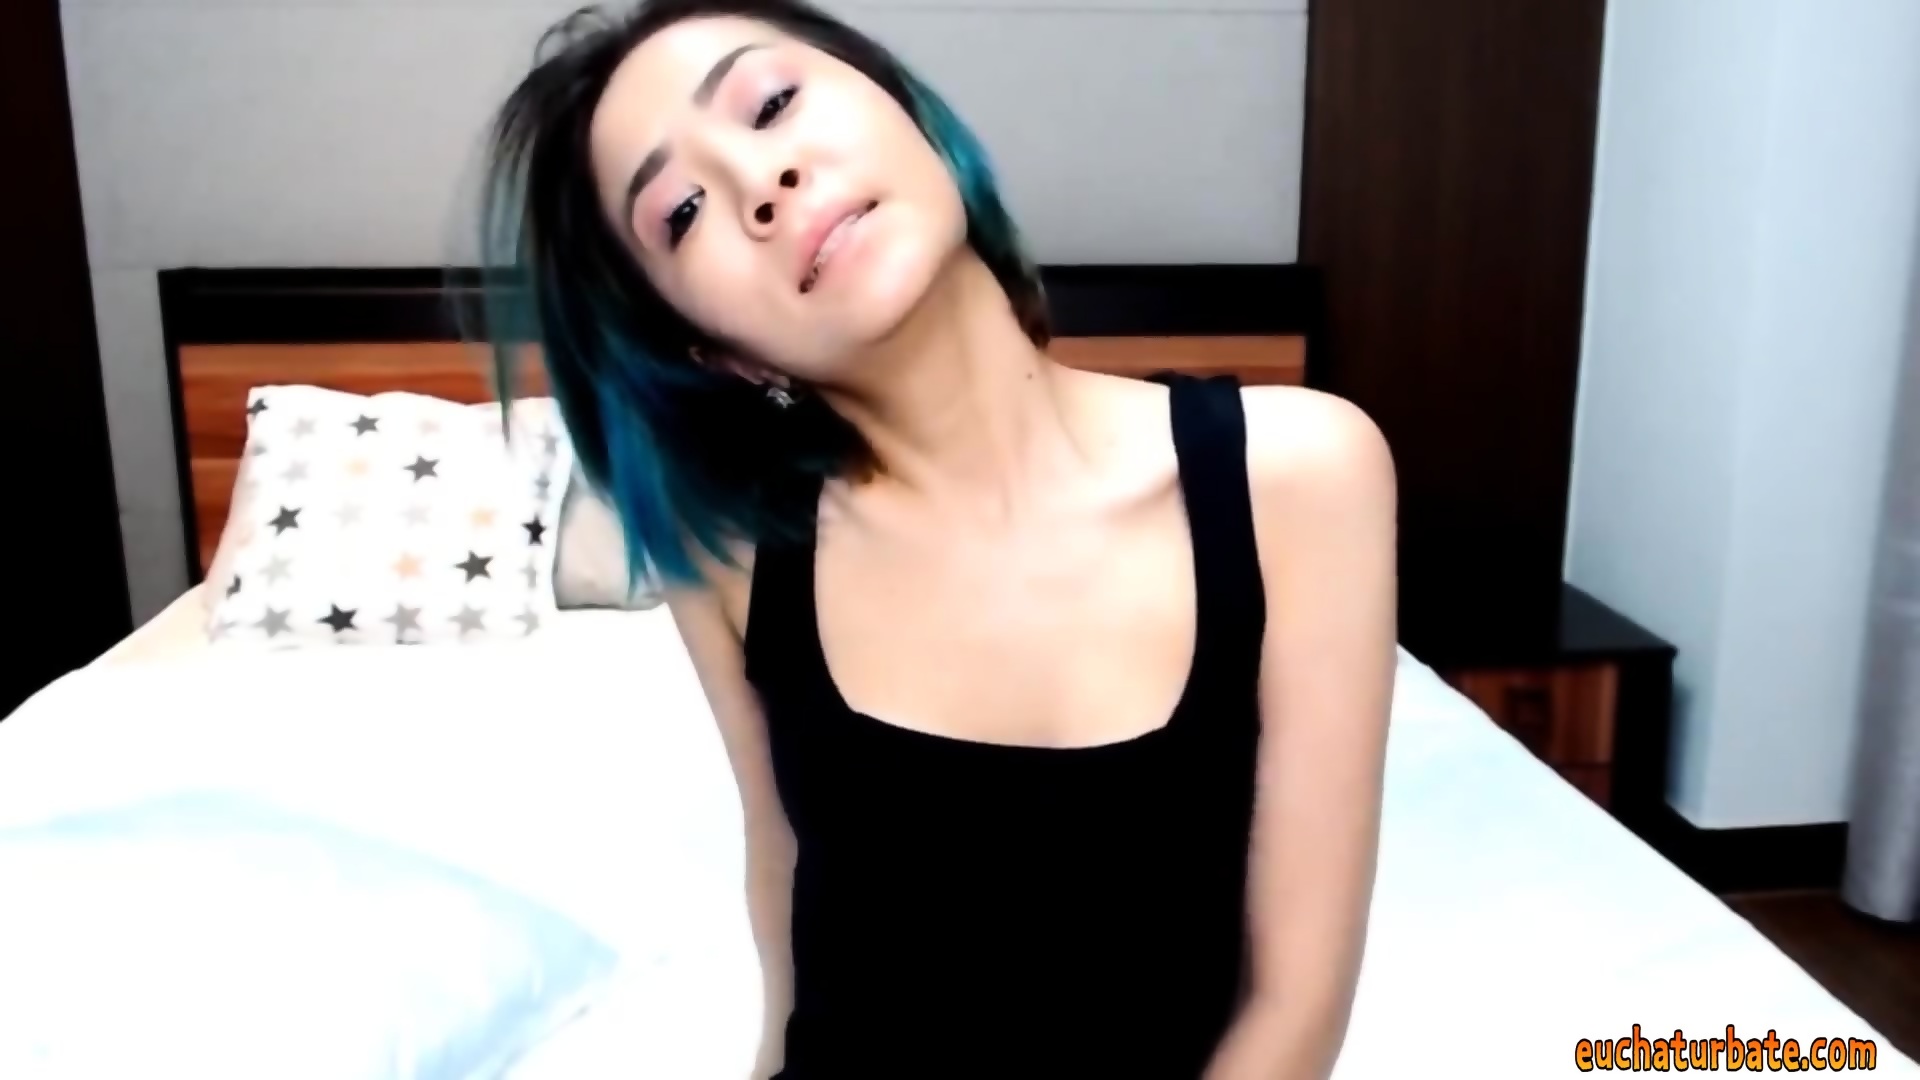 Japanese Small Titty Webcam Model Topless 1080p Eporner